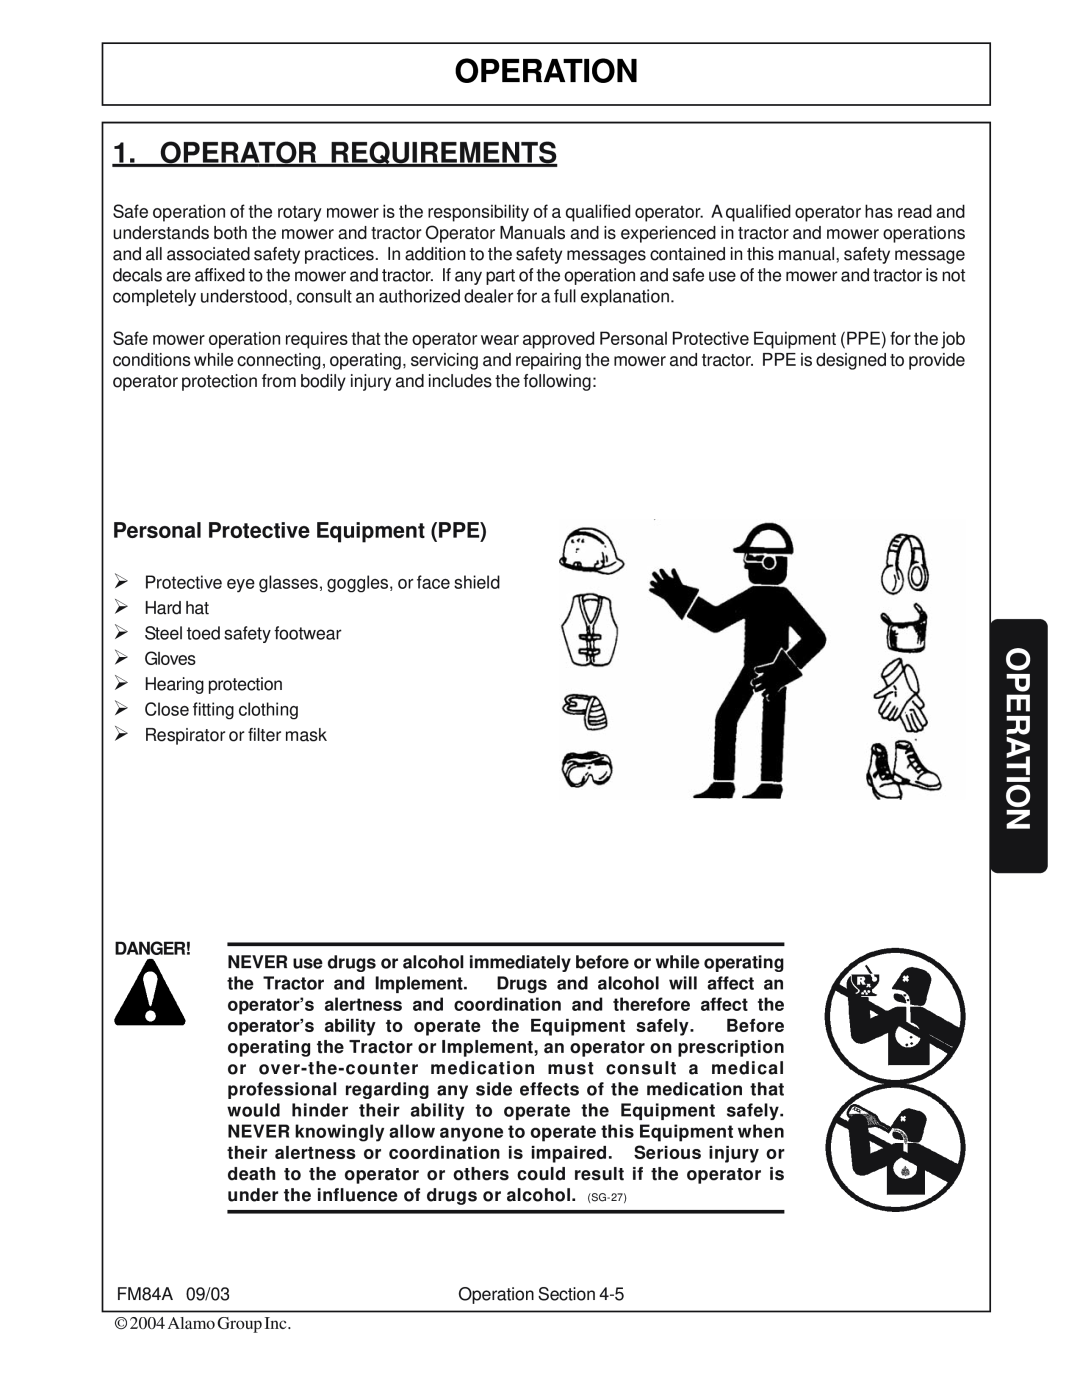 Servis-Rhino FM84A manual Operator Requirements, Operation, Personal Protective Equipment PPE 